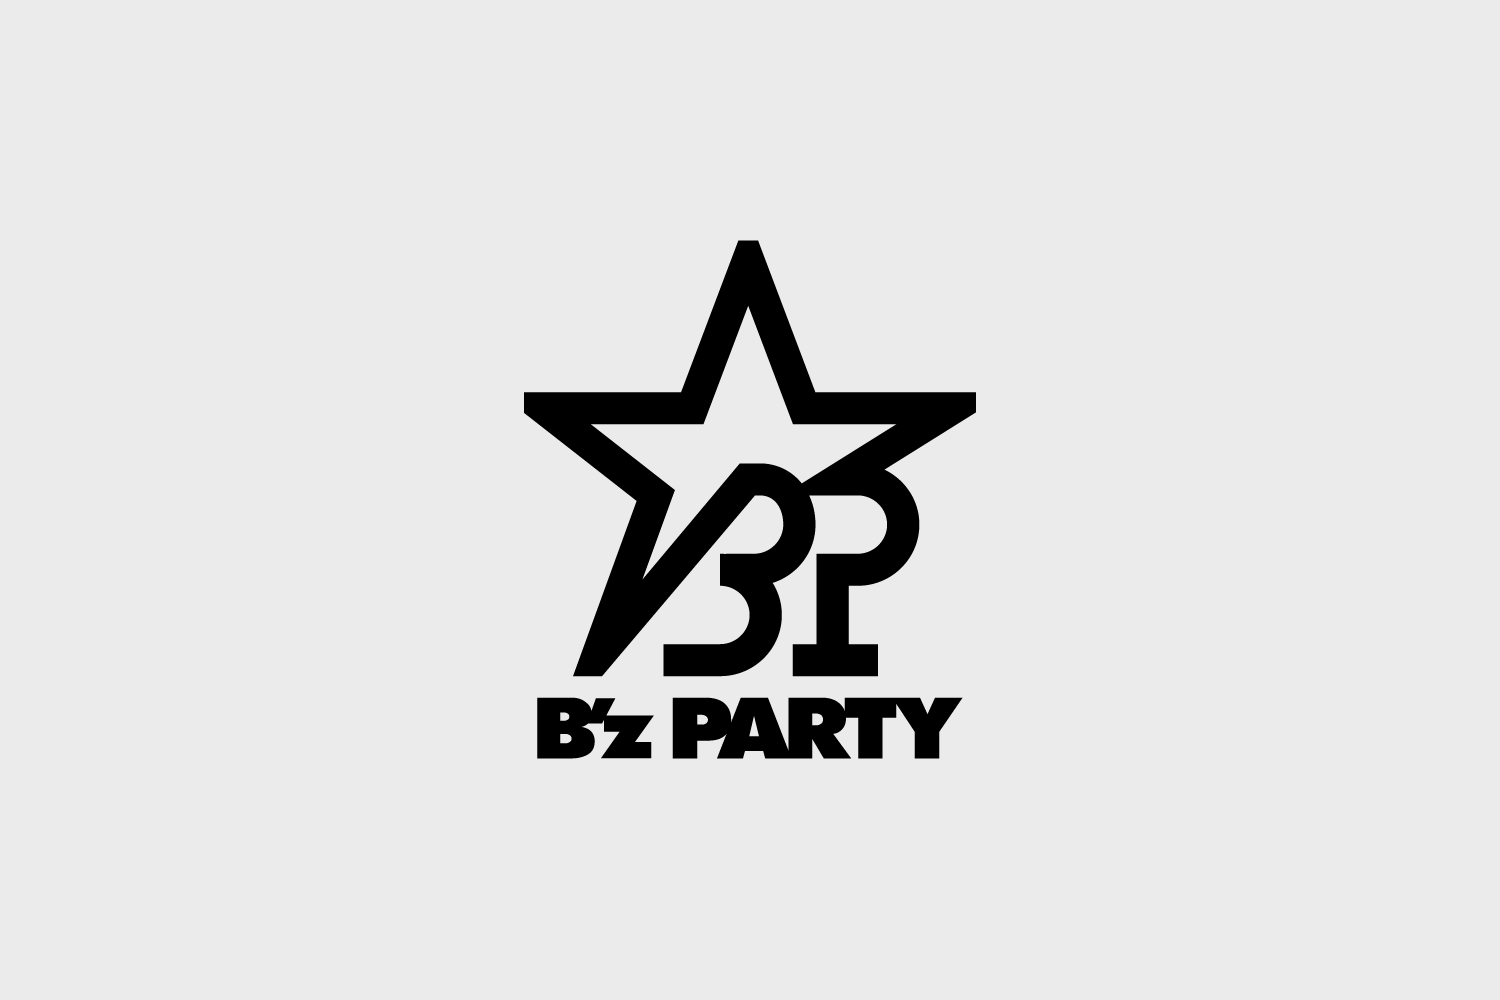 Bz party